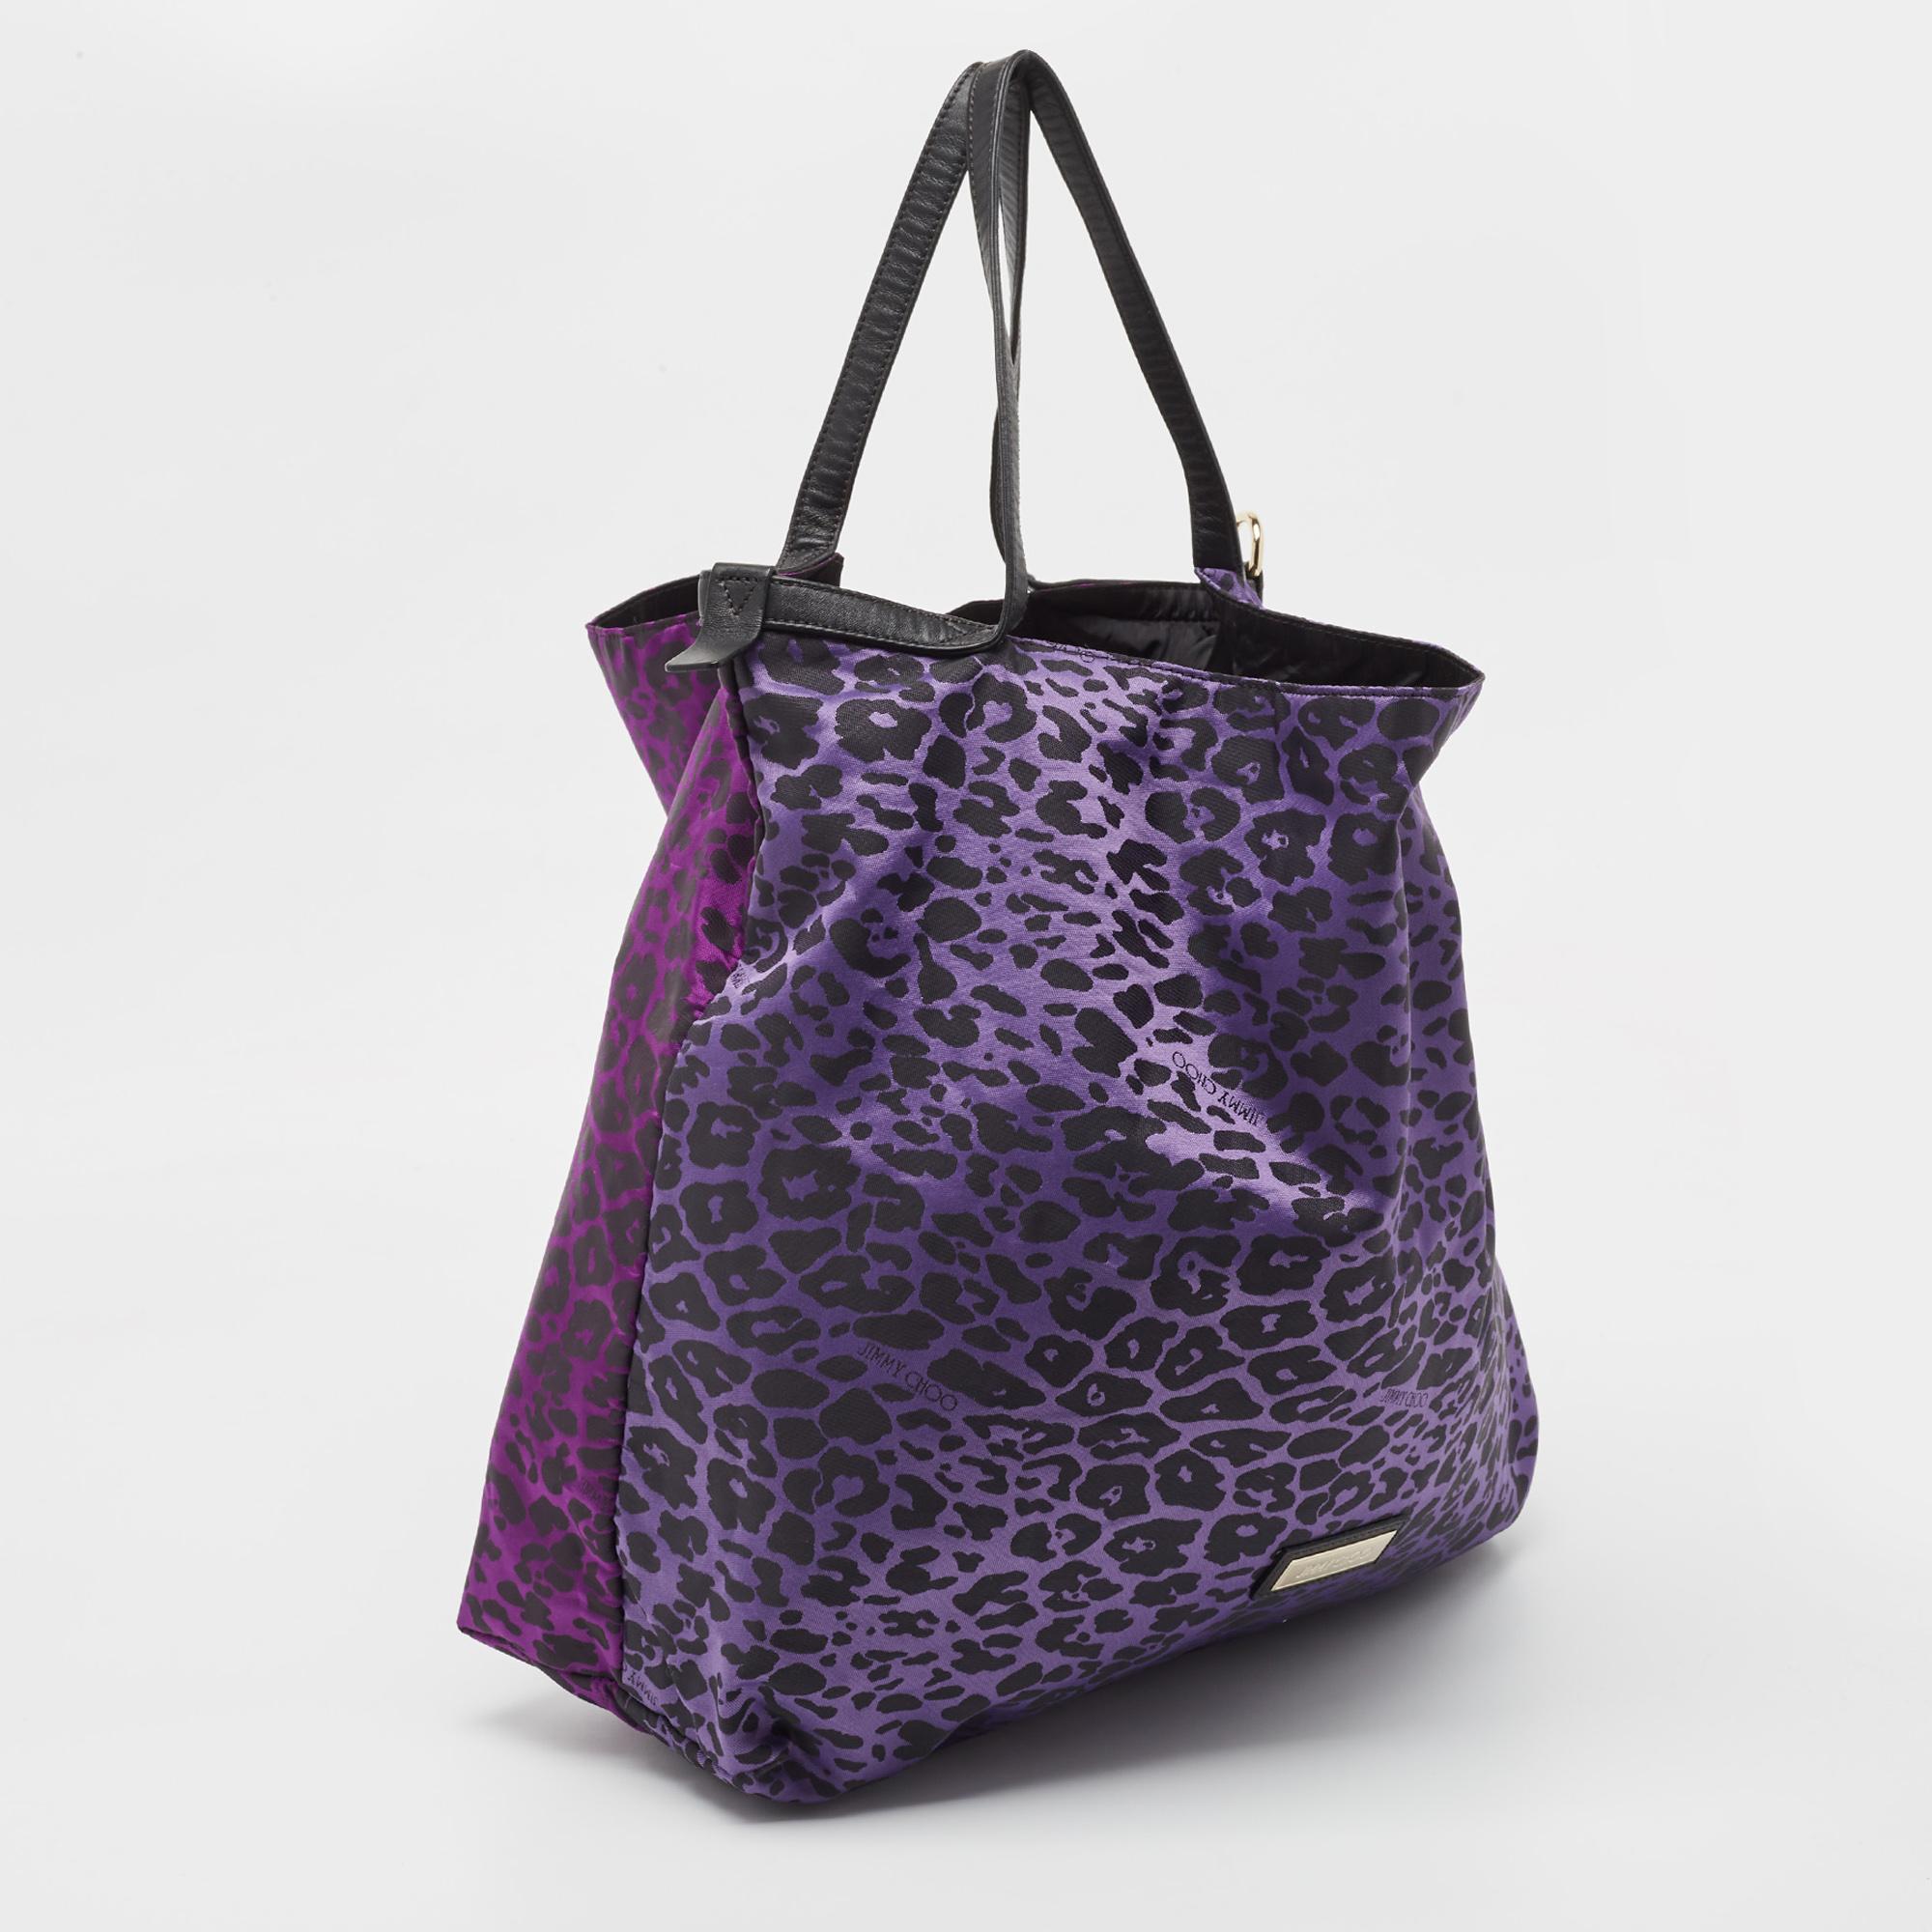 This alluring tote bag for women has been designed to assist you on any day. Convenient to carry and fashionably designed, the tote is cut with skill and sewn into a great shape. It is well-equipped to be a reliable accessory.


Includes
Original